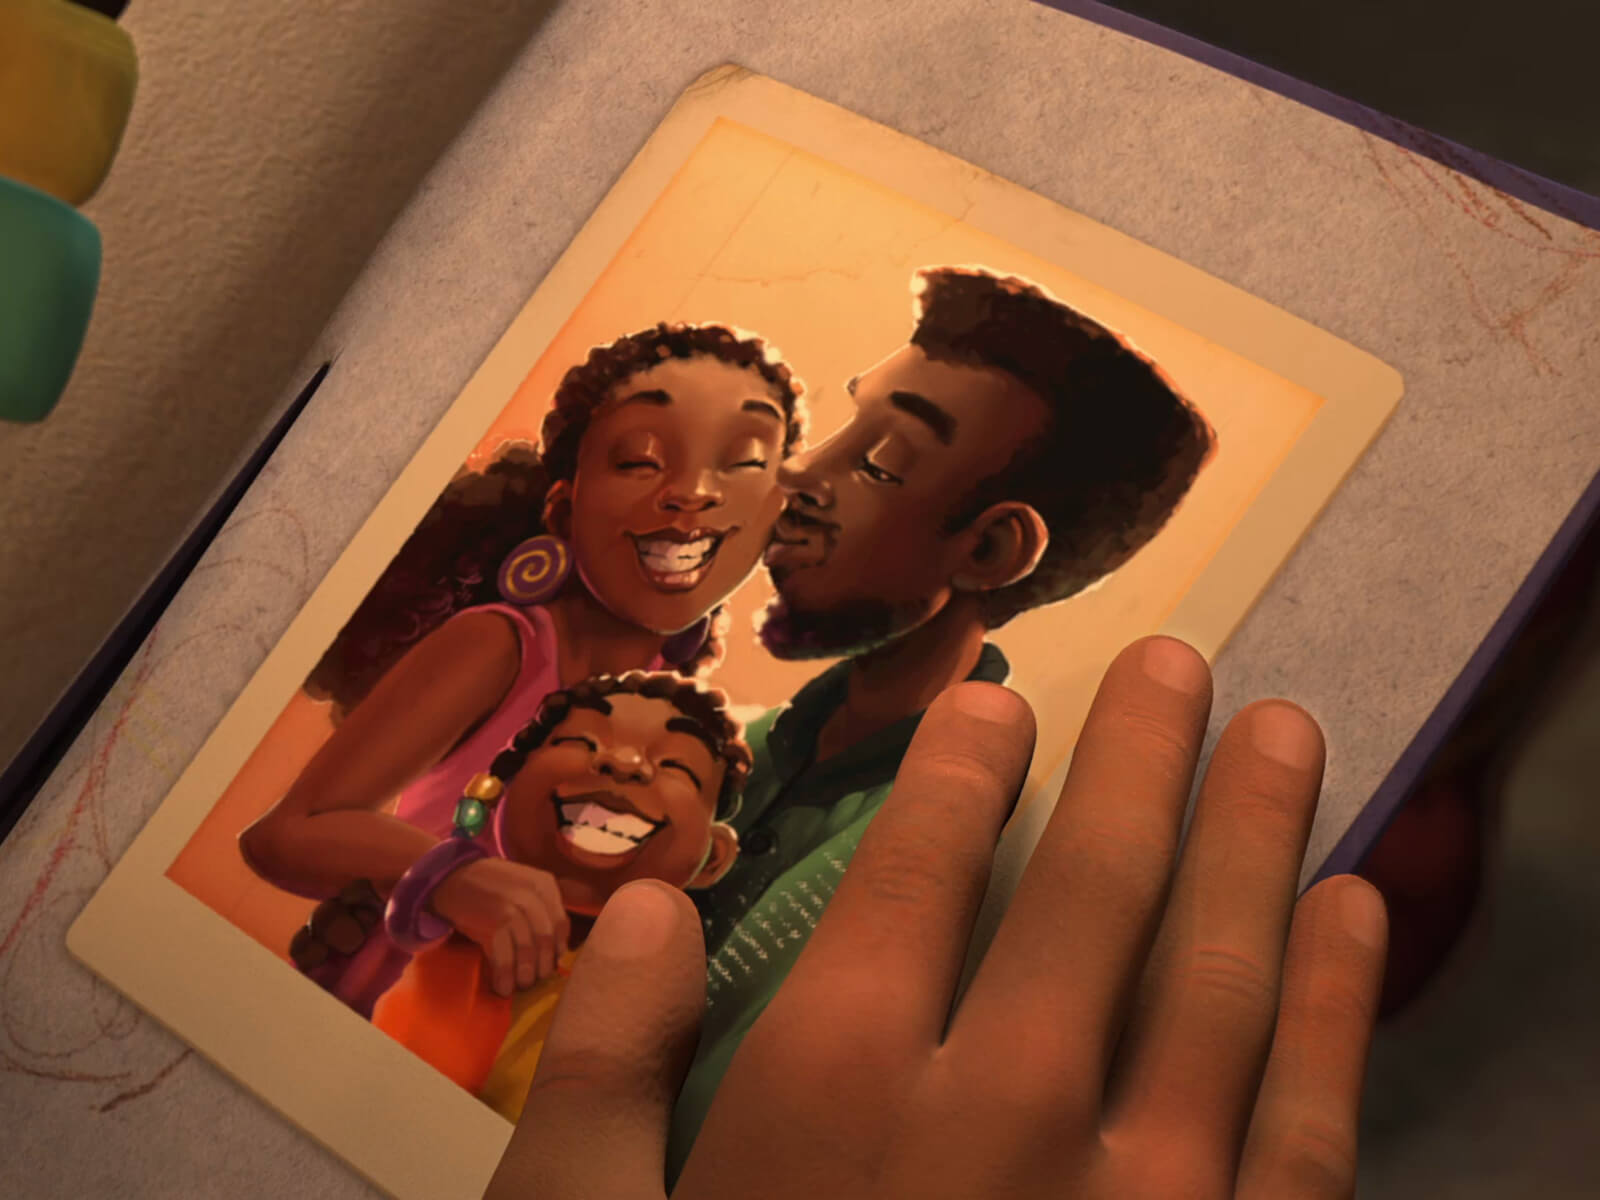 Screen capture from the student film Adija. A young girl looks at a happy family photograph.